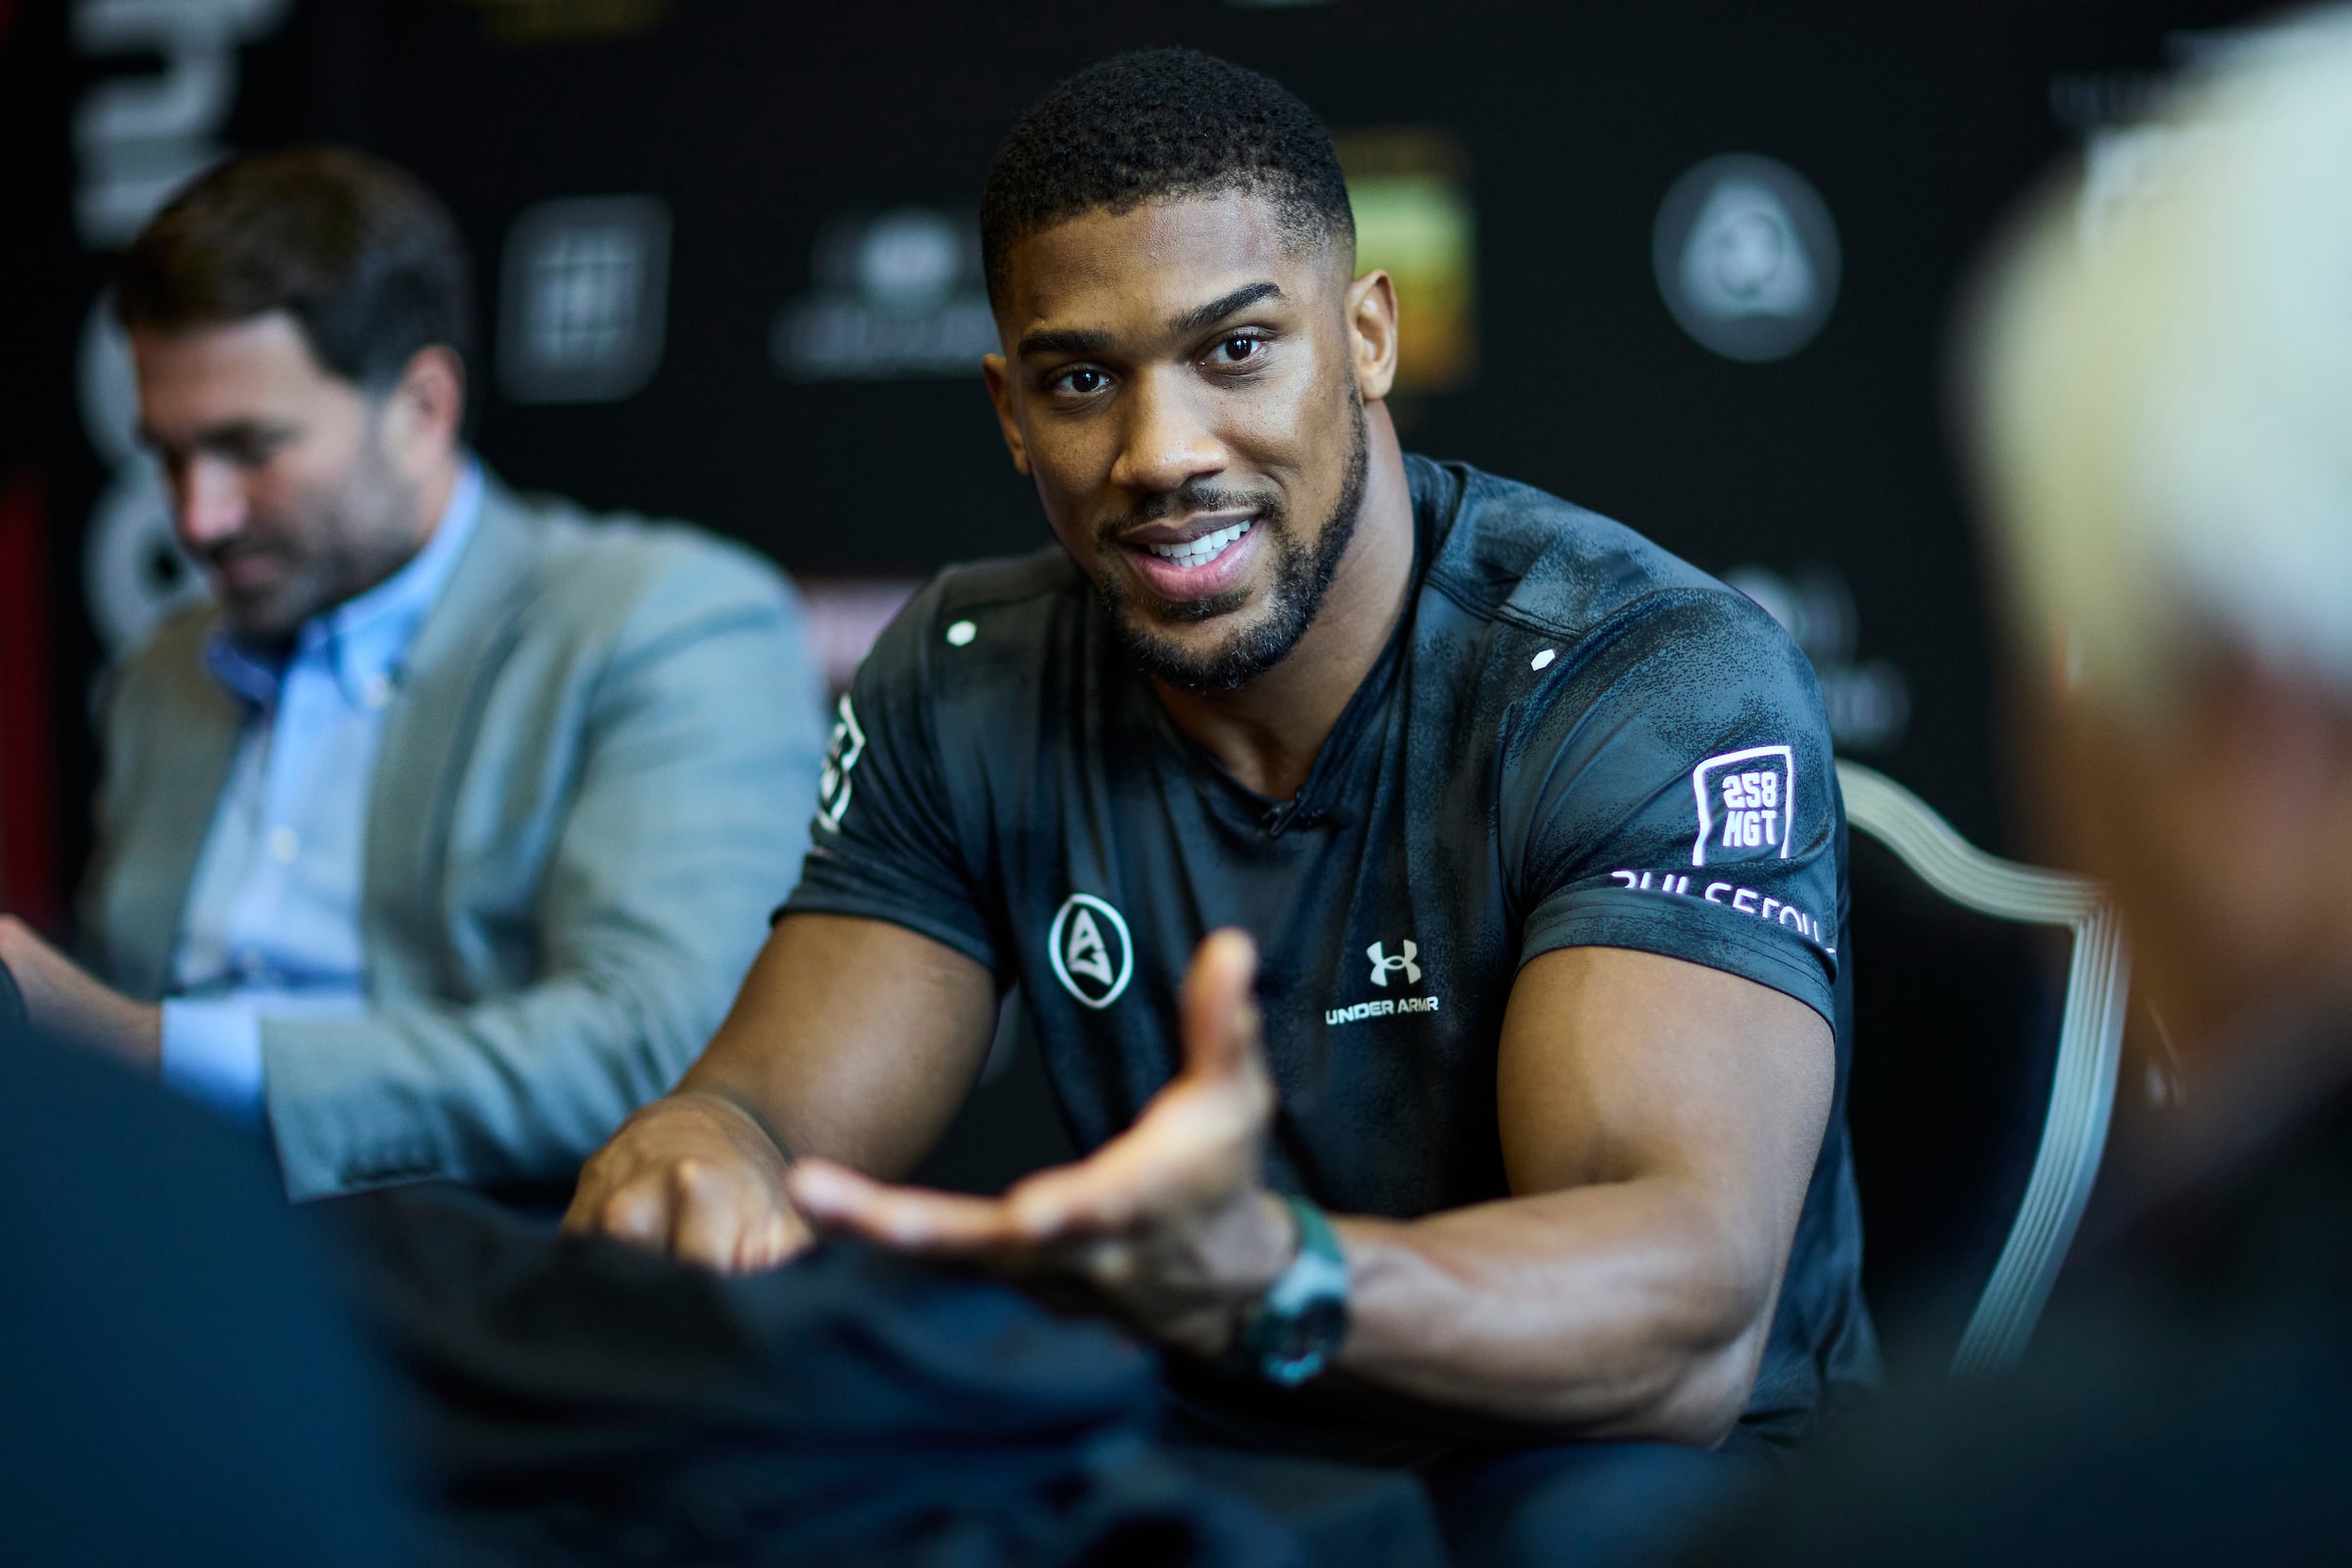 Joshua reveals proposed fight with Wilder is a distraction ahead of Whyte rematch